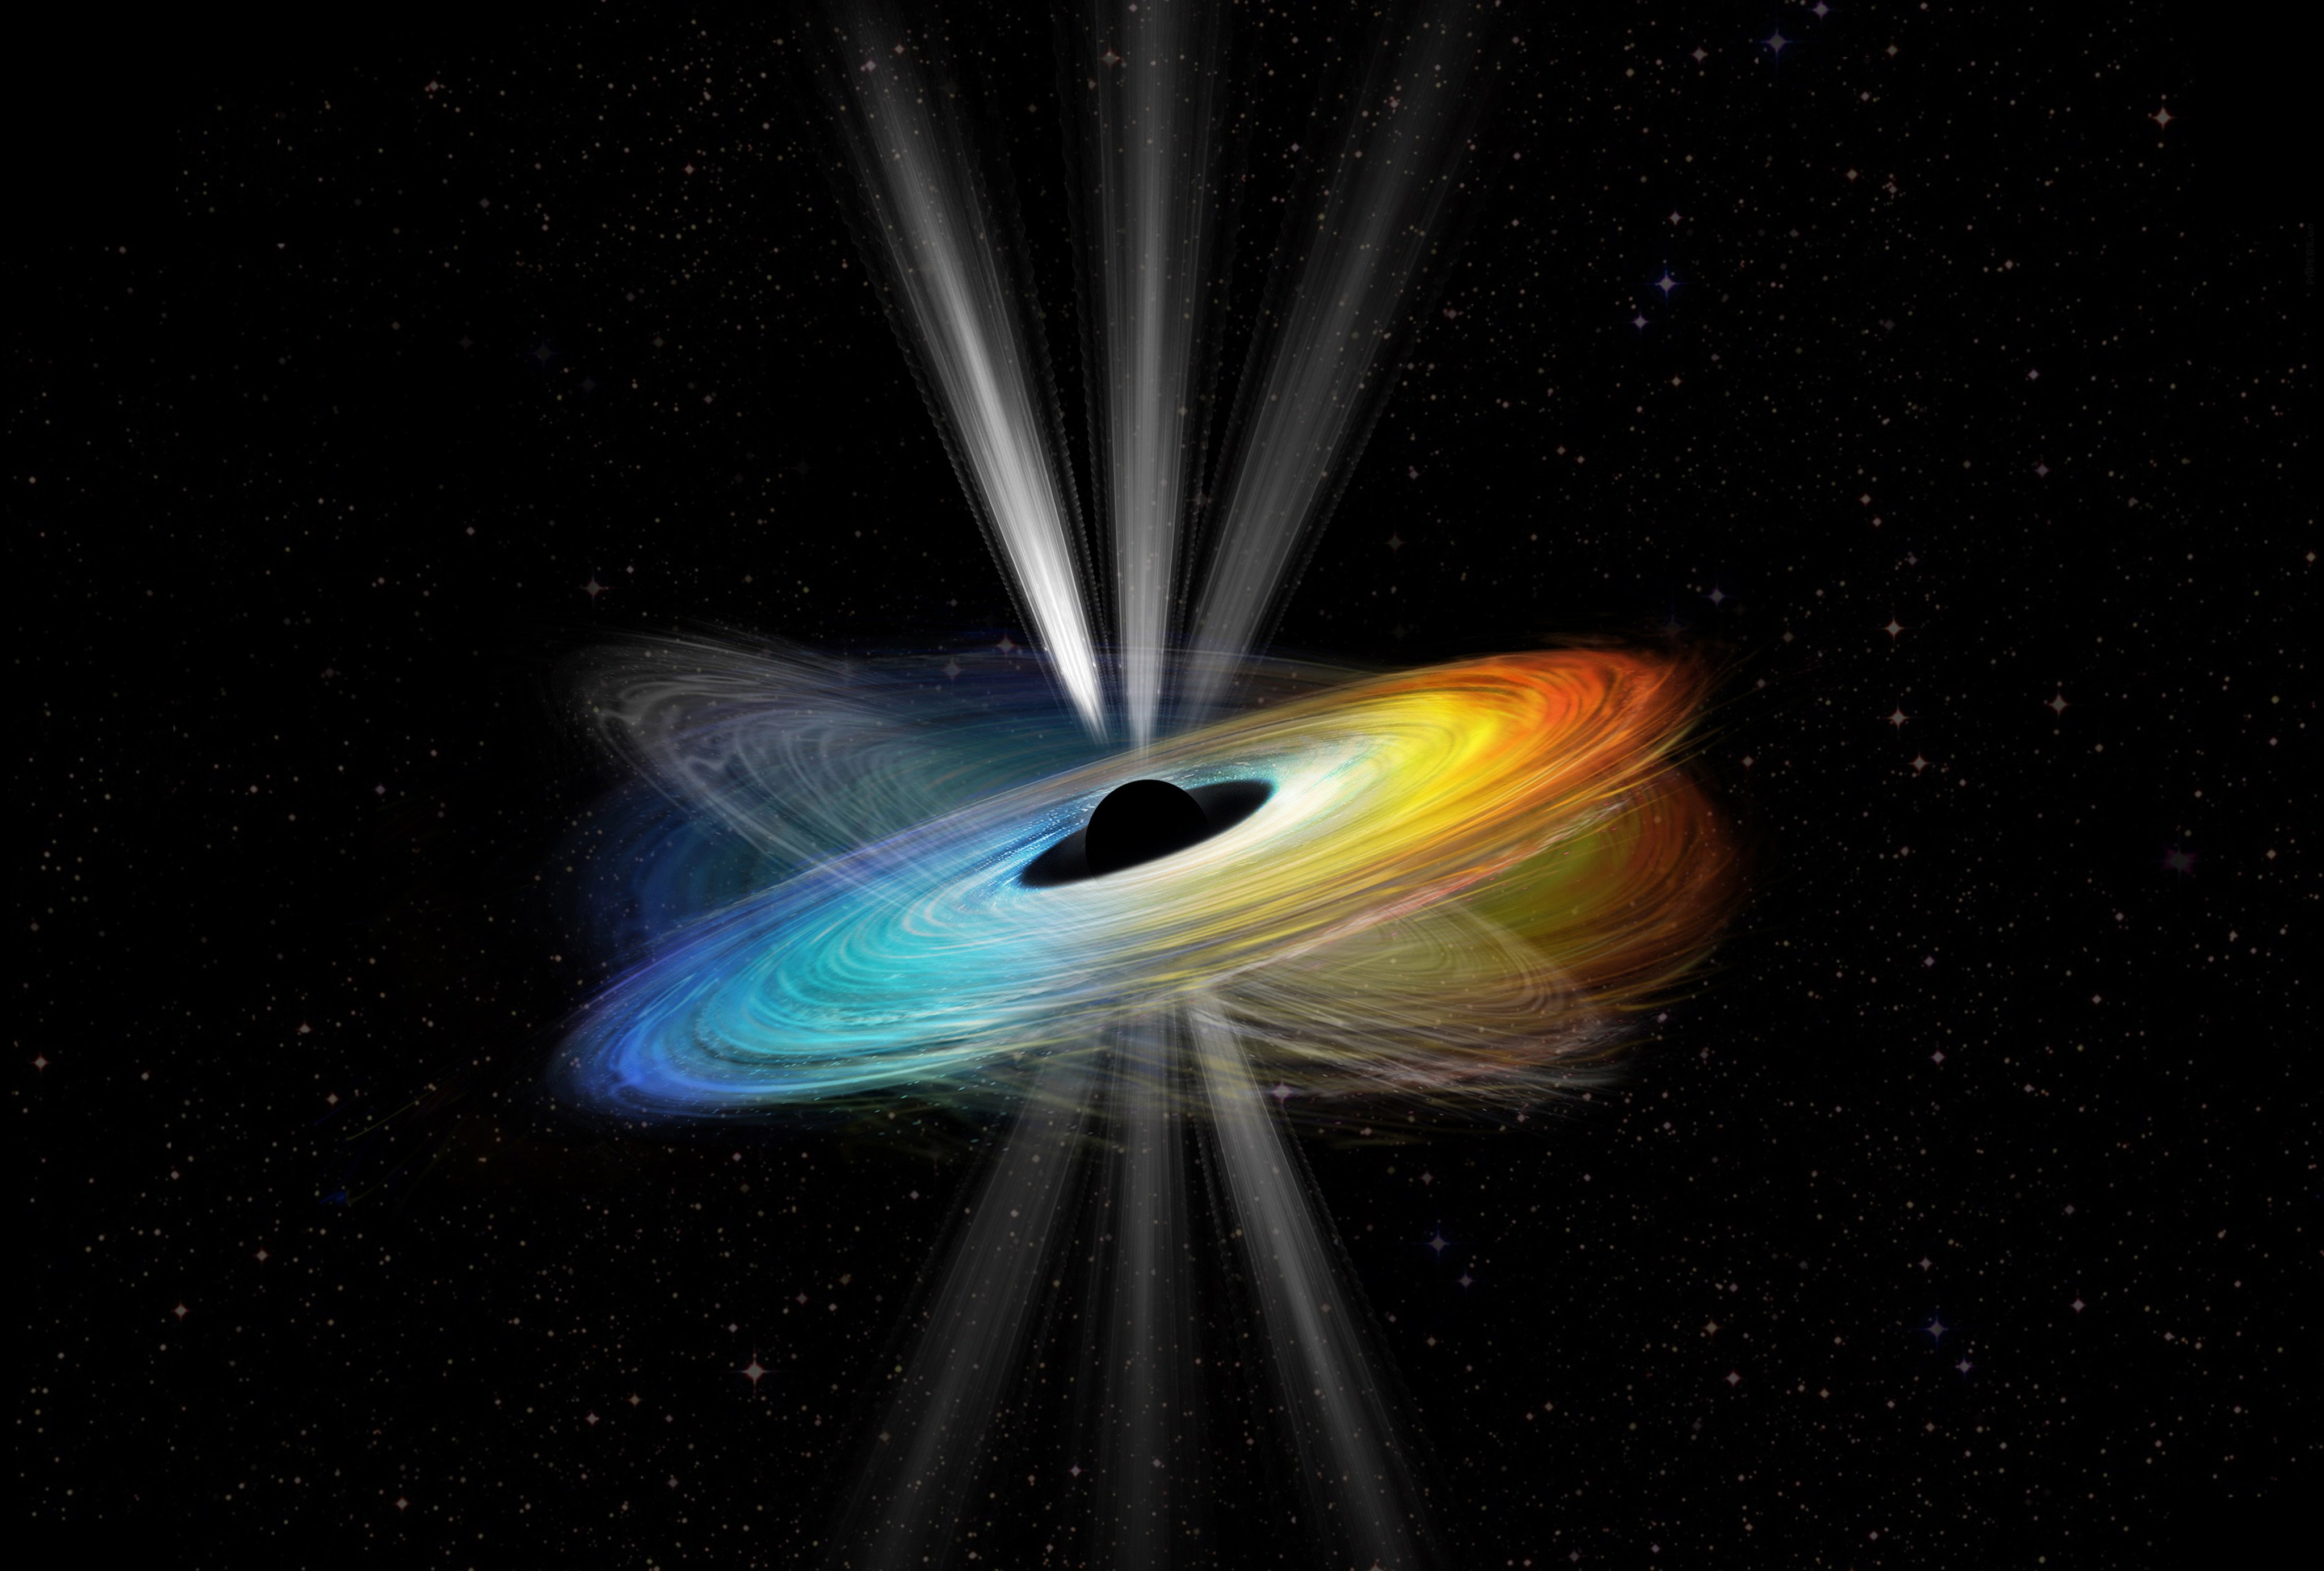 Artist’s image of the black hole’s wobbling jets. Photo: Handout